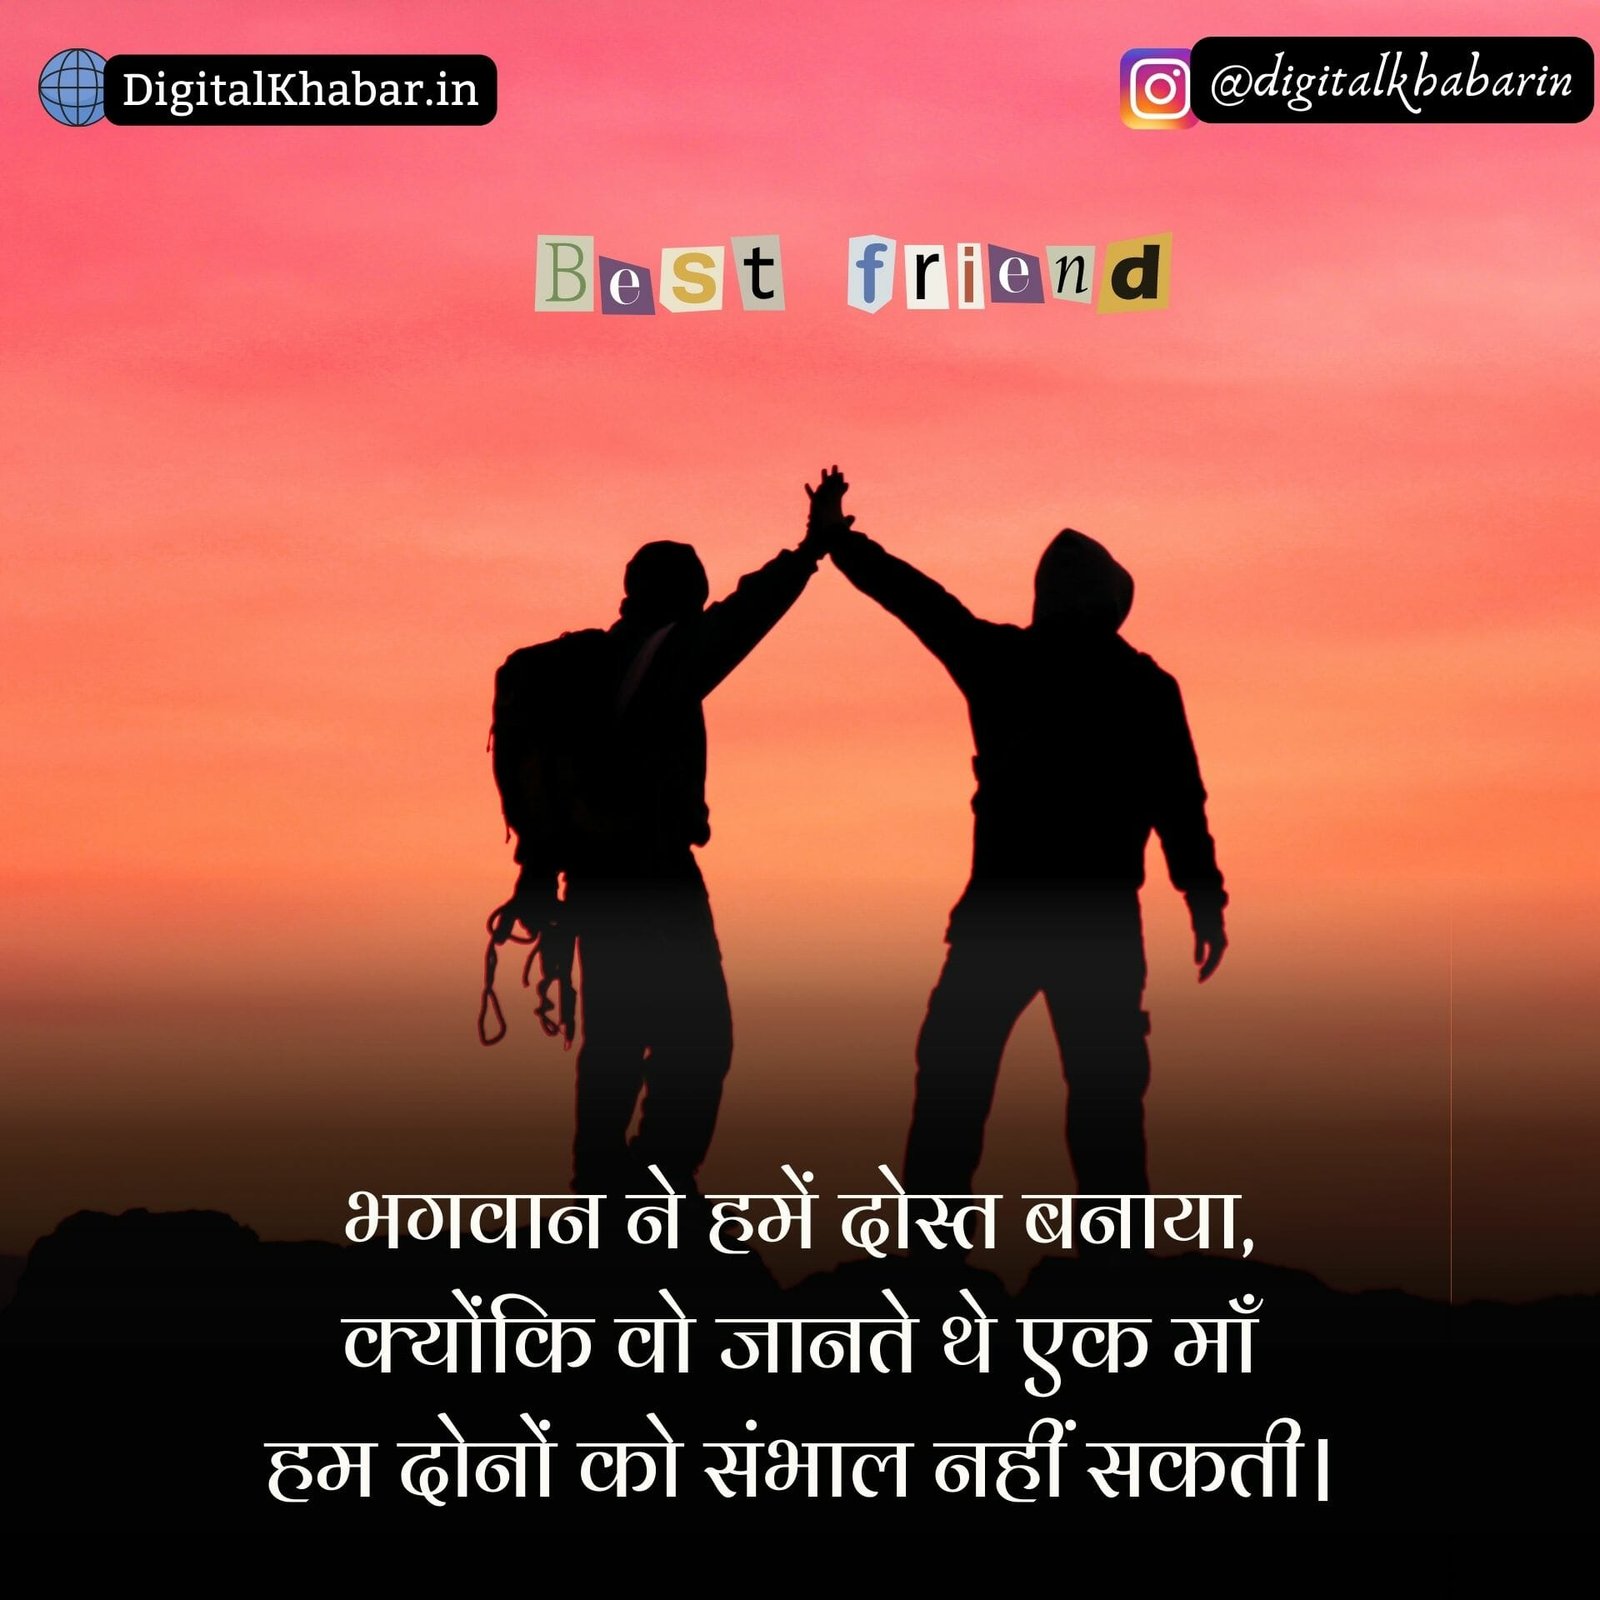 Friendship status in hindi with image